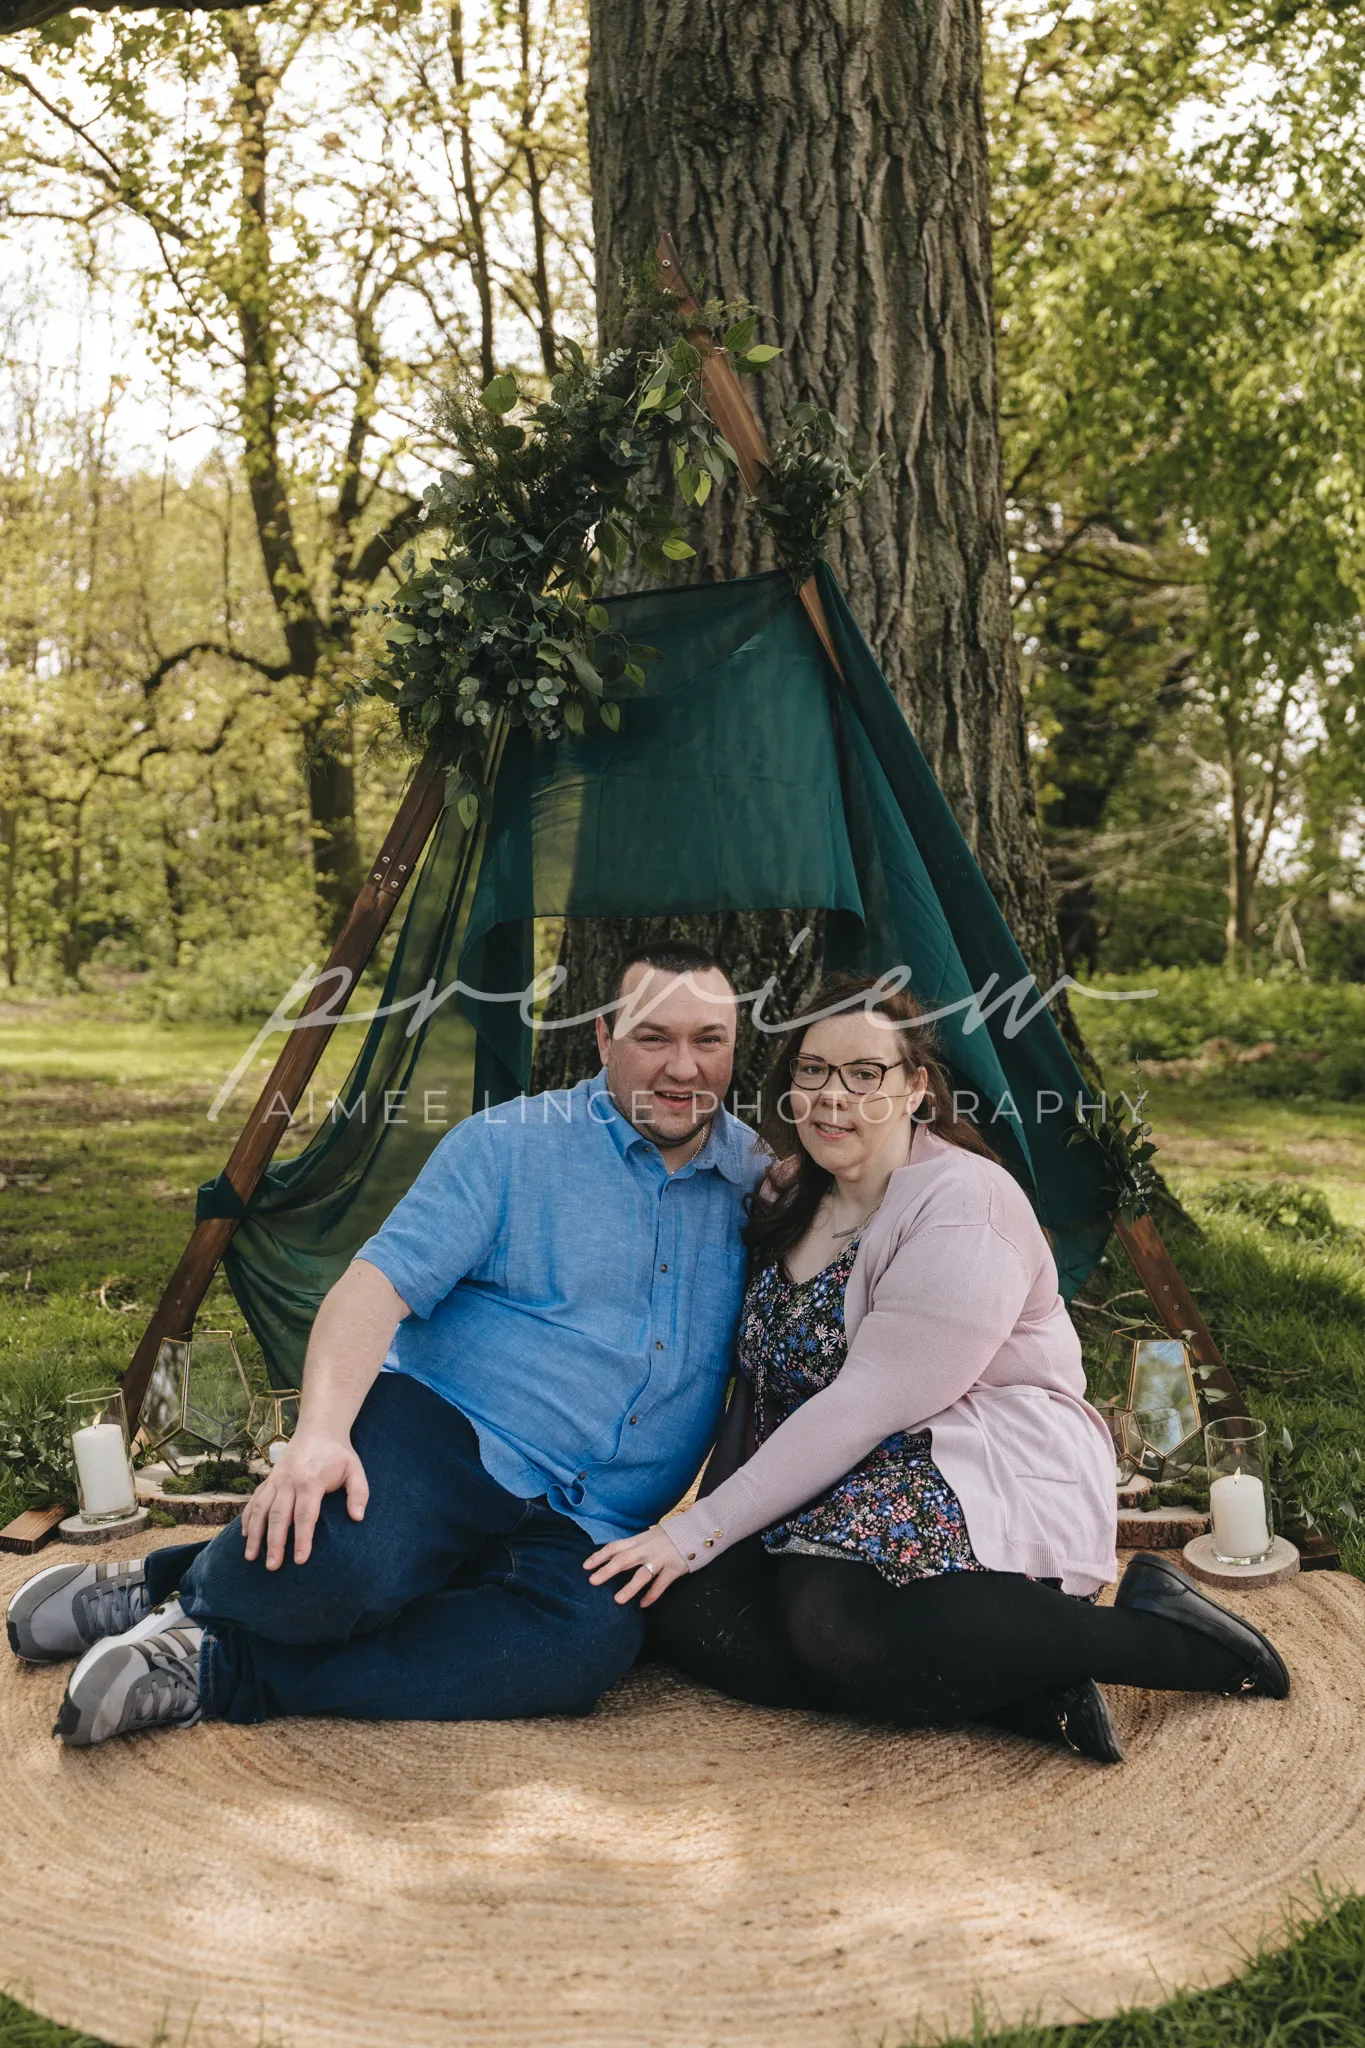 A couple, Ashley and Samantha, sit closely on a circular mat under a teepee adorned with greenery in a lush park, smiling at the camera. Lanterns and natural decor enhance the cozy,